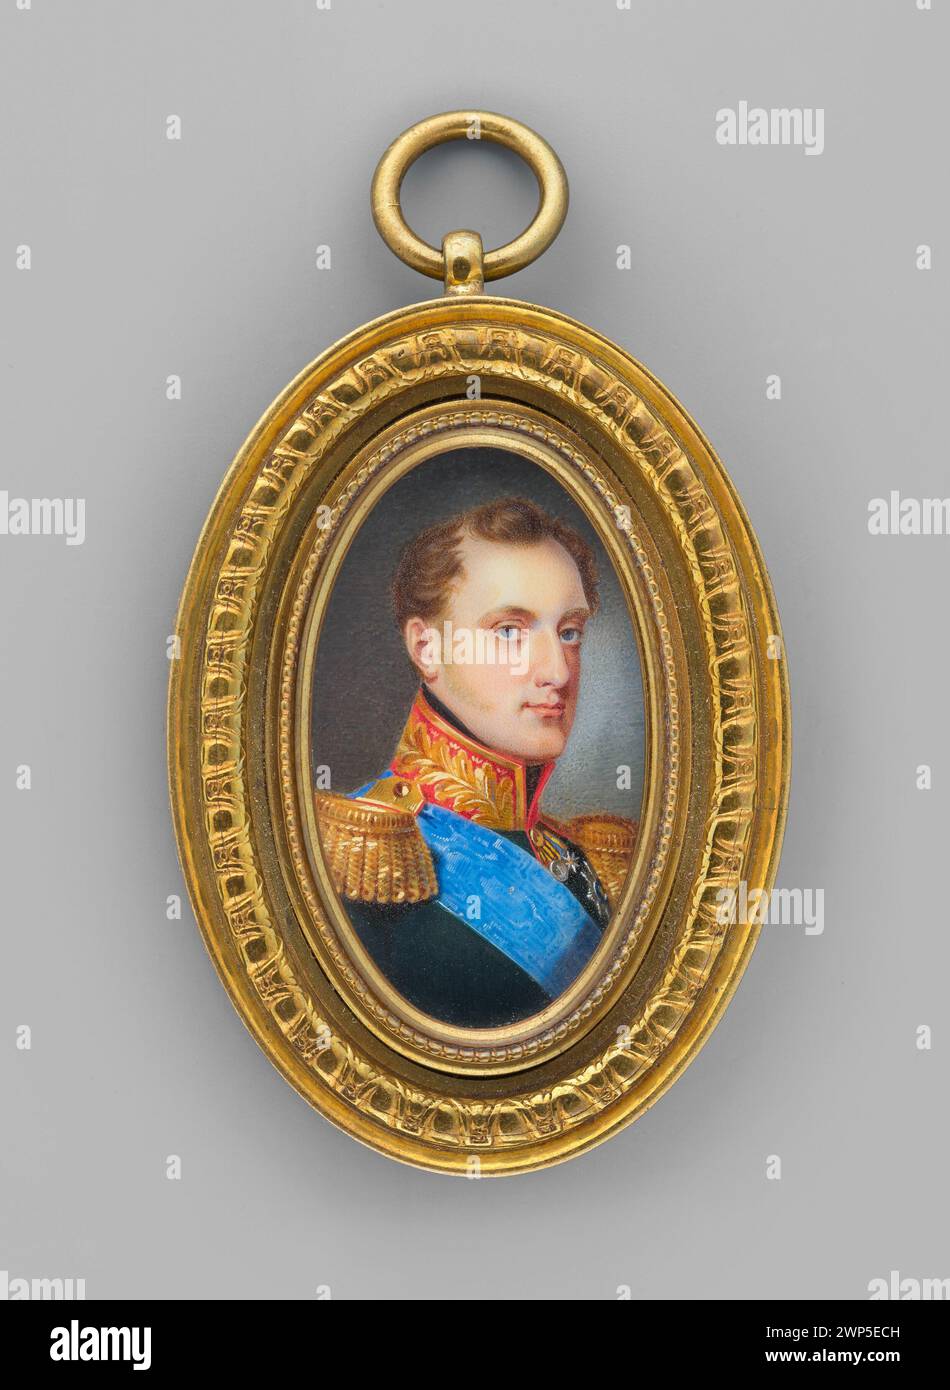 Miko Aj and Romanow (1796-1855), tsar of Russia; Winberg, Ivan (Fl. 1800-1851); 1830 (1830-00-00-1830-00-00);Mikołaj I (Russian emperor - 1796-1855), Mikołaj I (Russian emperor - 1796-1855) - iconography, Potocki, Andrzej Stefan (1920-1995) - collections, foreign miniatures, uniforms, men, orders, portraits of en trois -quarts , male portraits, rulers, soldiers Stock Photo